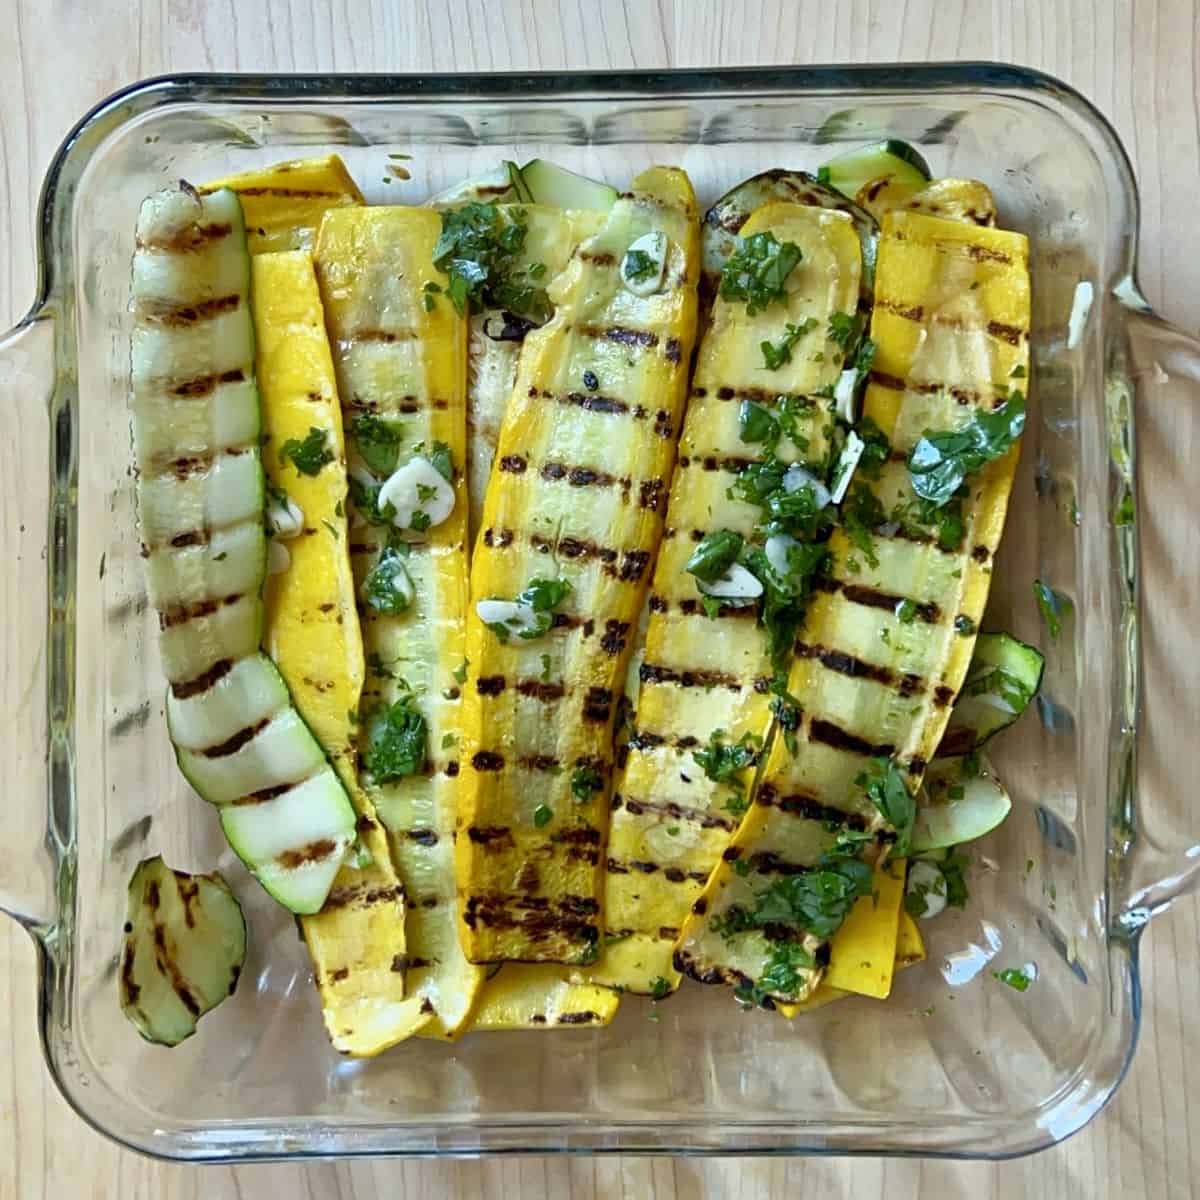 Grilled zucchini being marinated in a dish.